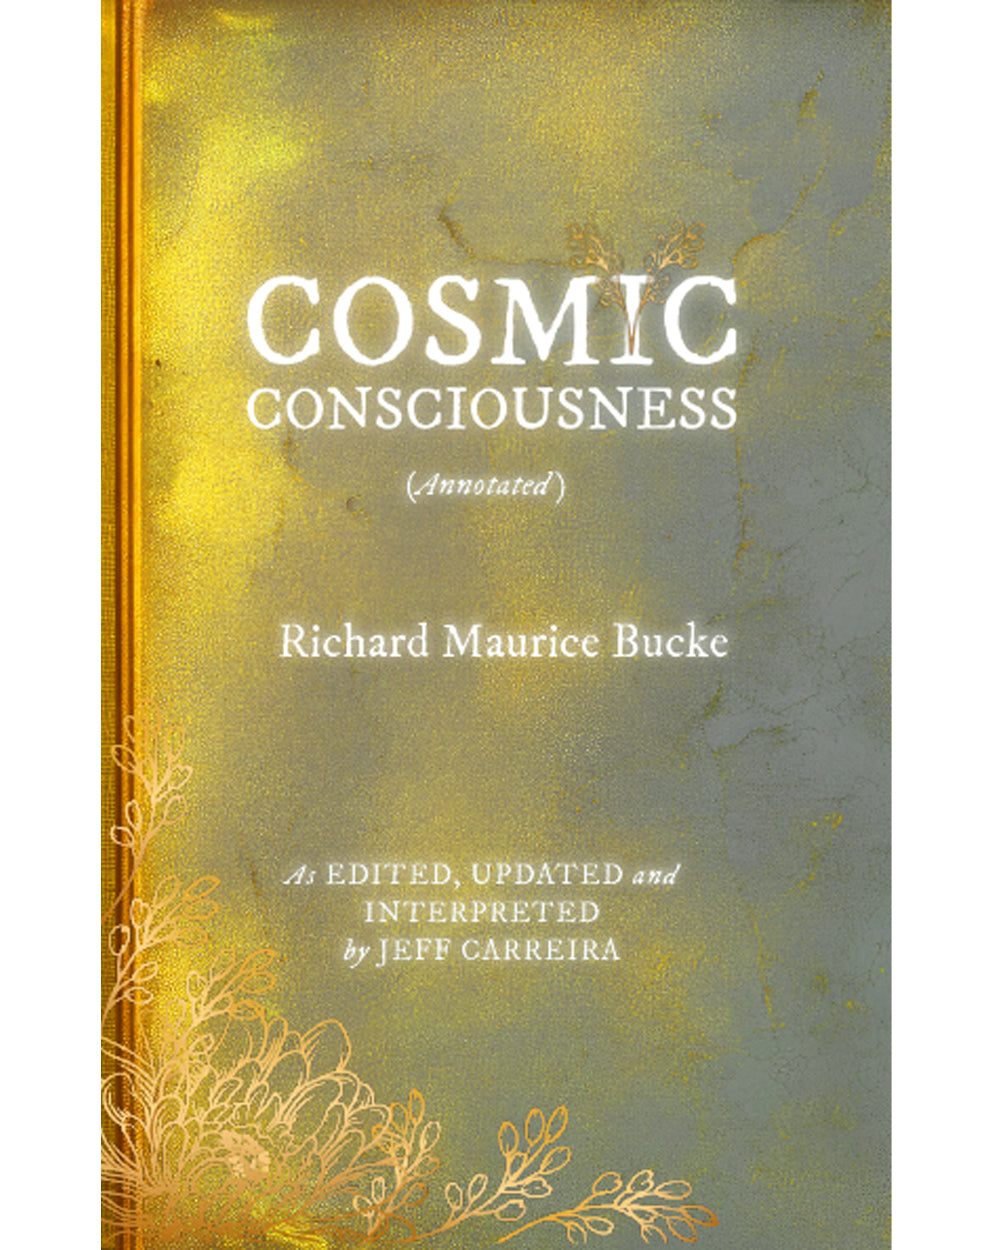 Cosmic Consciousness (Annotated): A Study in the Evolution of the Human Mind